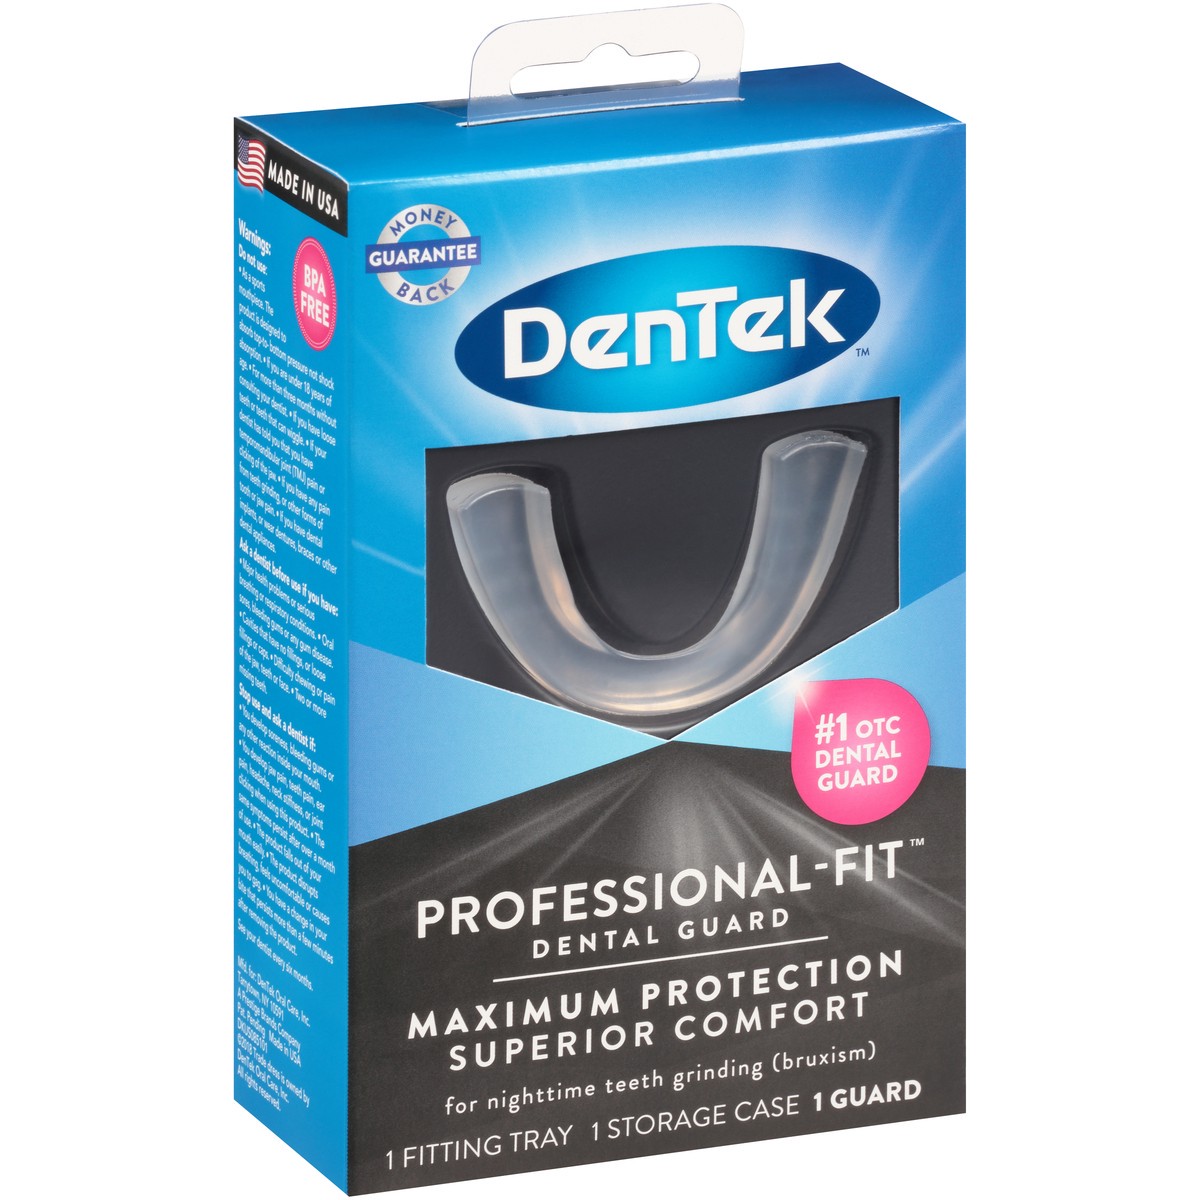 slide 3 of 9, DenTek Professional-Fit Dental Guard for Nighttime Teeth Grinding with Guard, Fitting Tray, & Storage Case, 1 ct